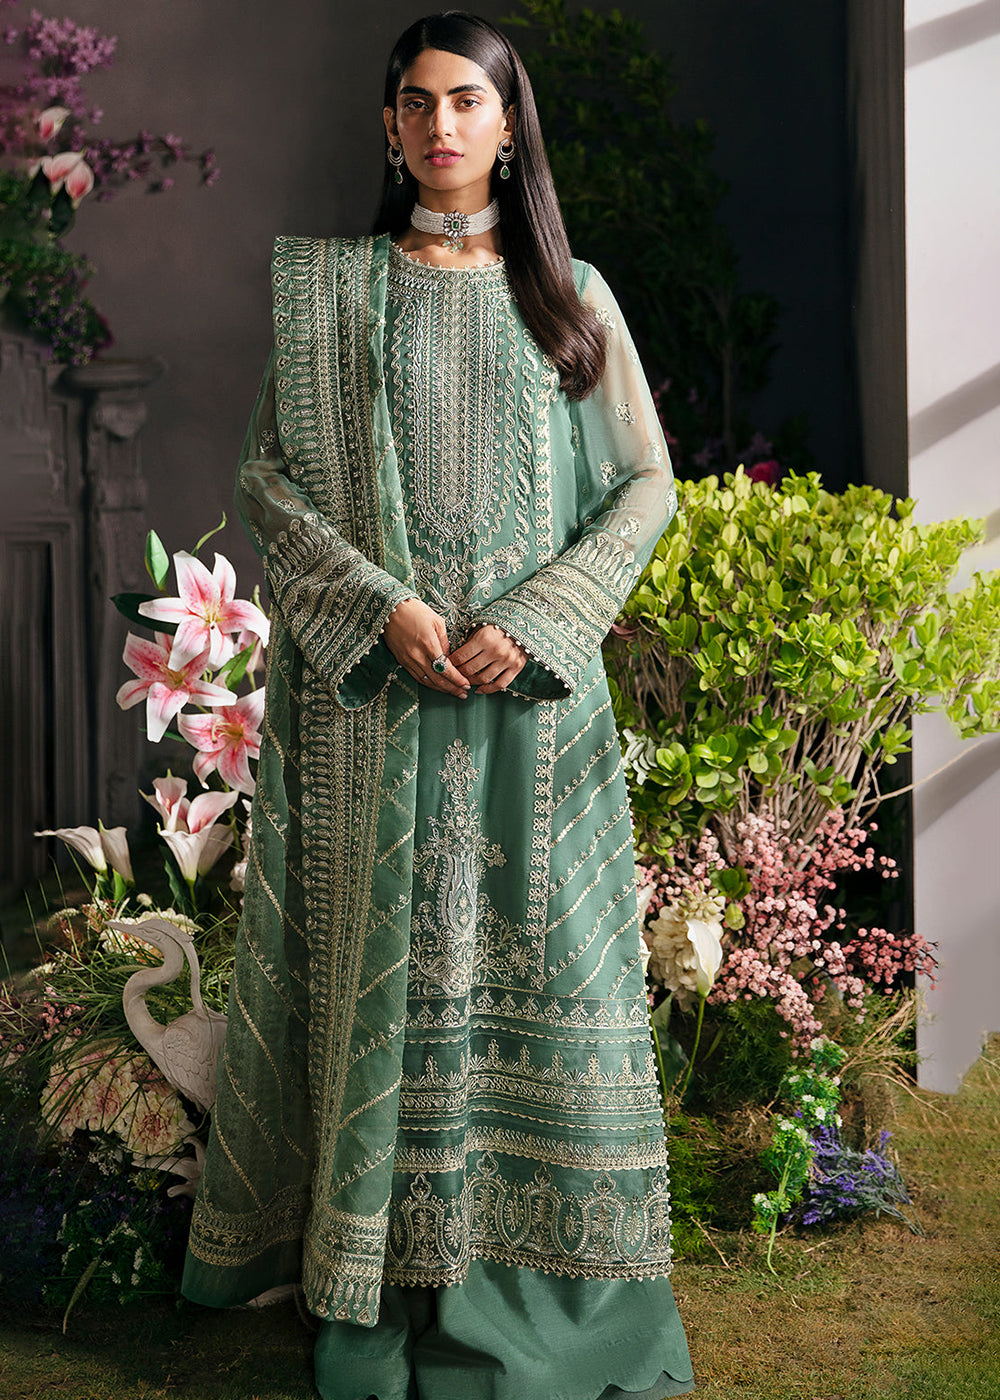 Buy Now Green Pakistani Palazzo Suit - Afrozeh La Fuchsia Formals '23 - Sea Mist Online in USA, UK, Canada & Worldwide at Empress Clothing